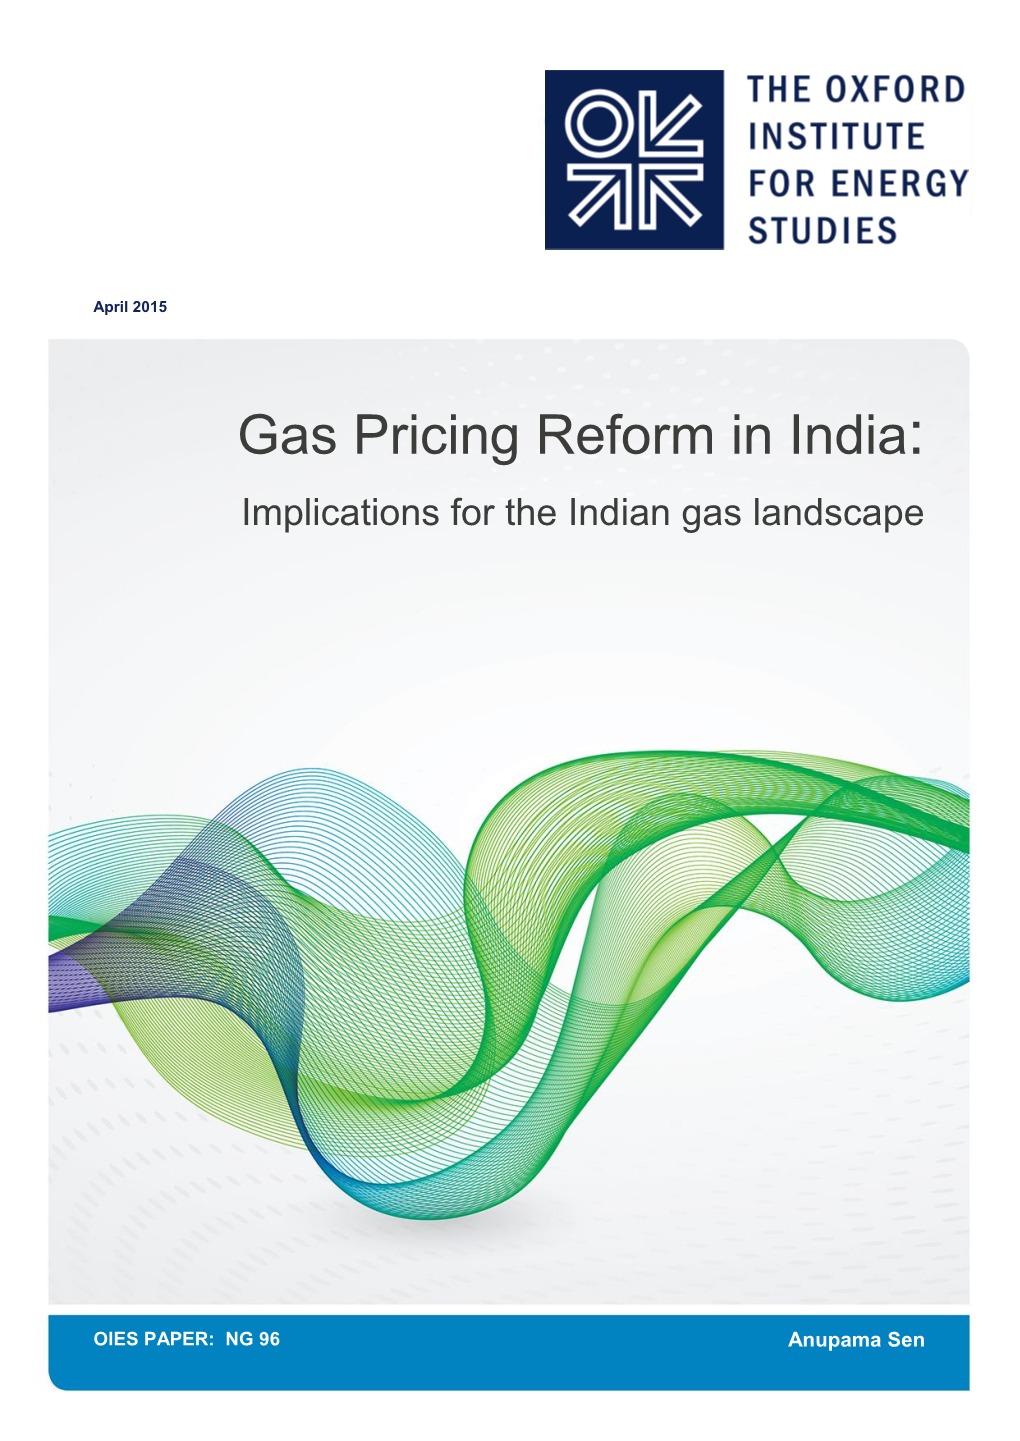 Gas Pricing Reform in India: Implications for the Indian Gas Landscape